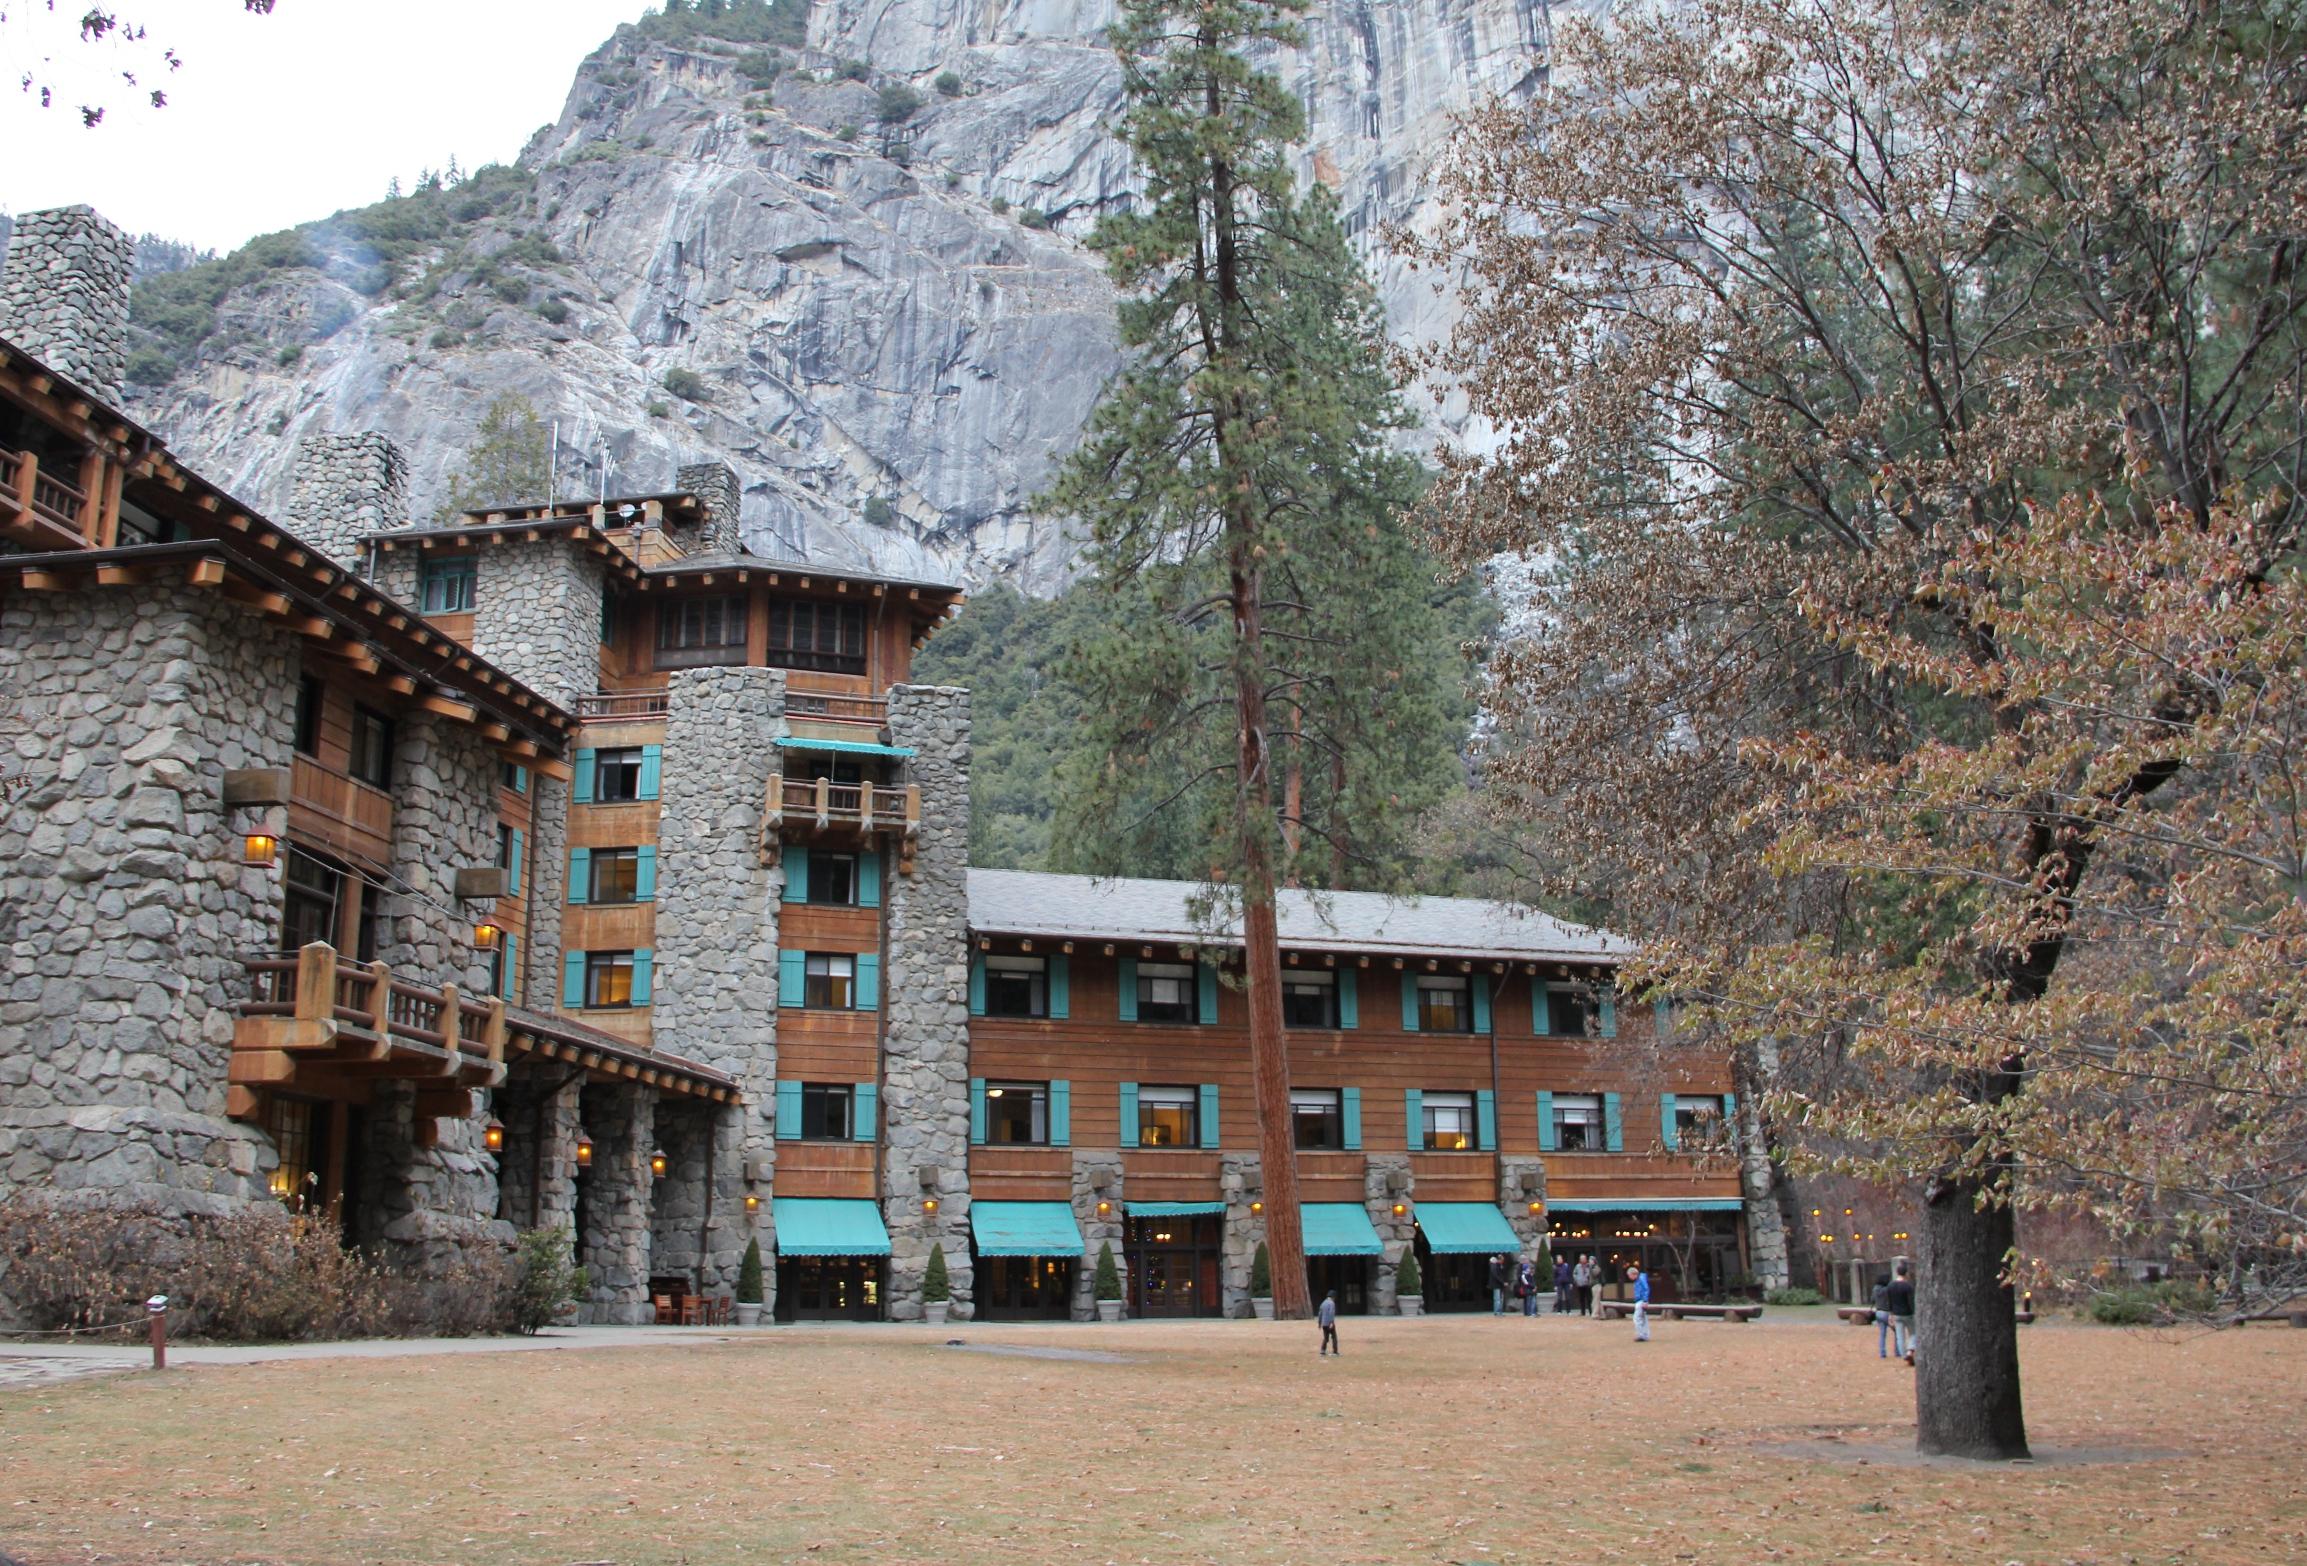 Yosemite's Ahwahnee Hotel, Other Attractions To Get New Names ...